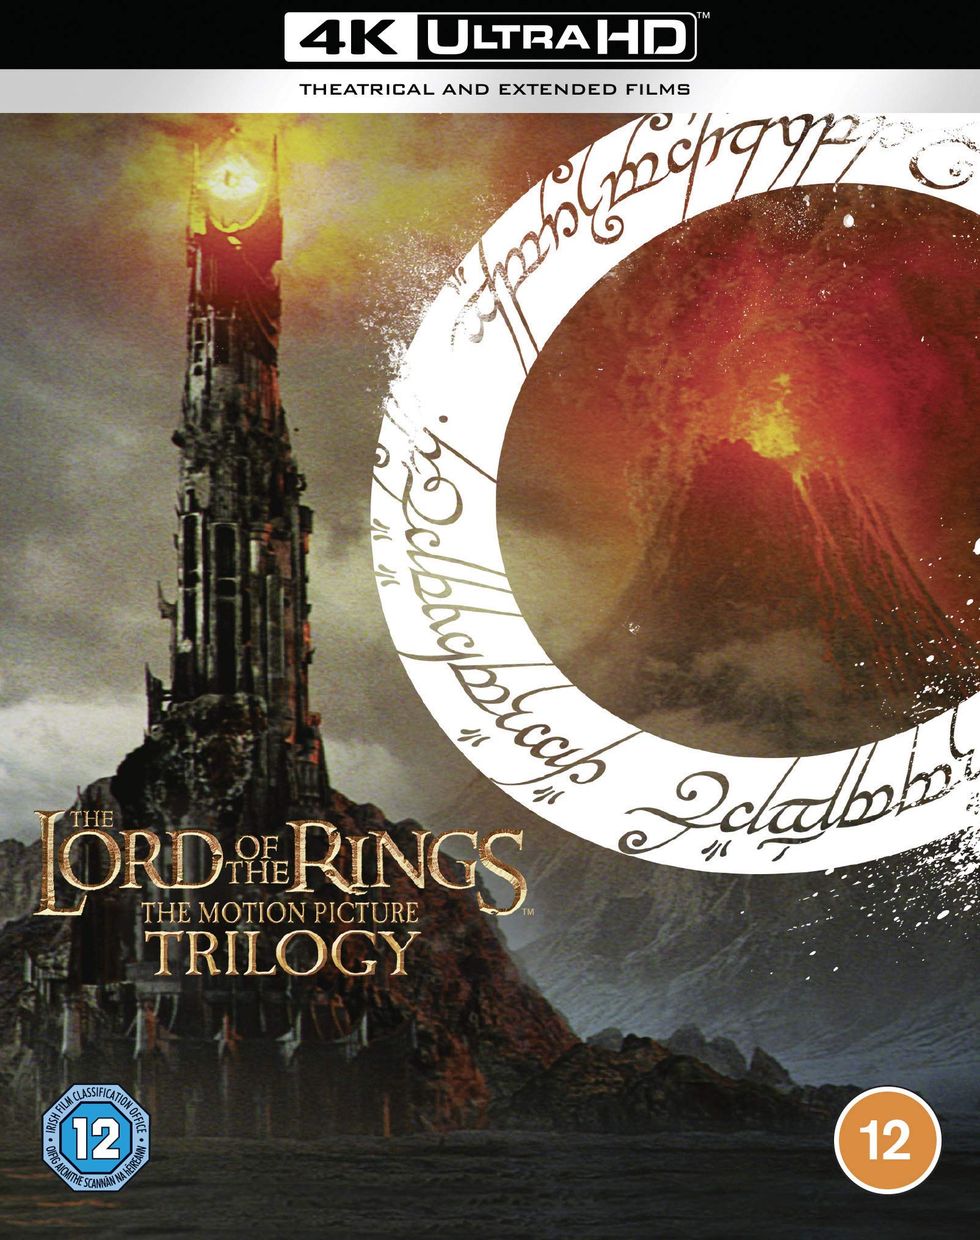 Die Herr der Ringe-Trilogie: [Theatrical and Extended Edition] [4K Ultra-HD] [2001] [Blu-ray] [Region Free]